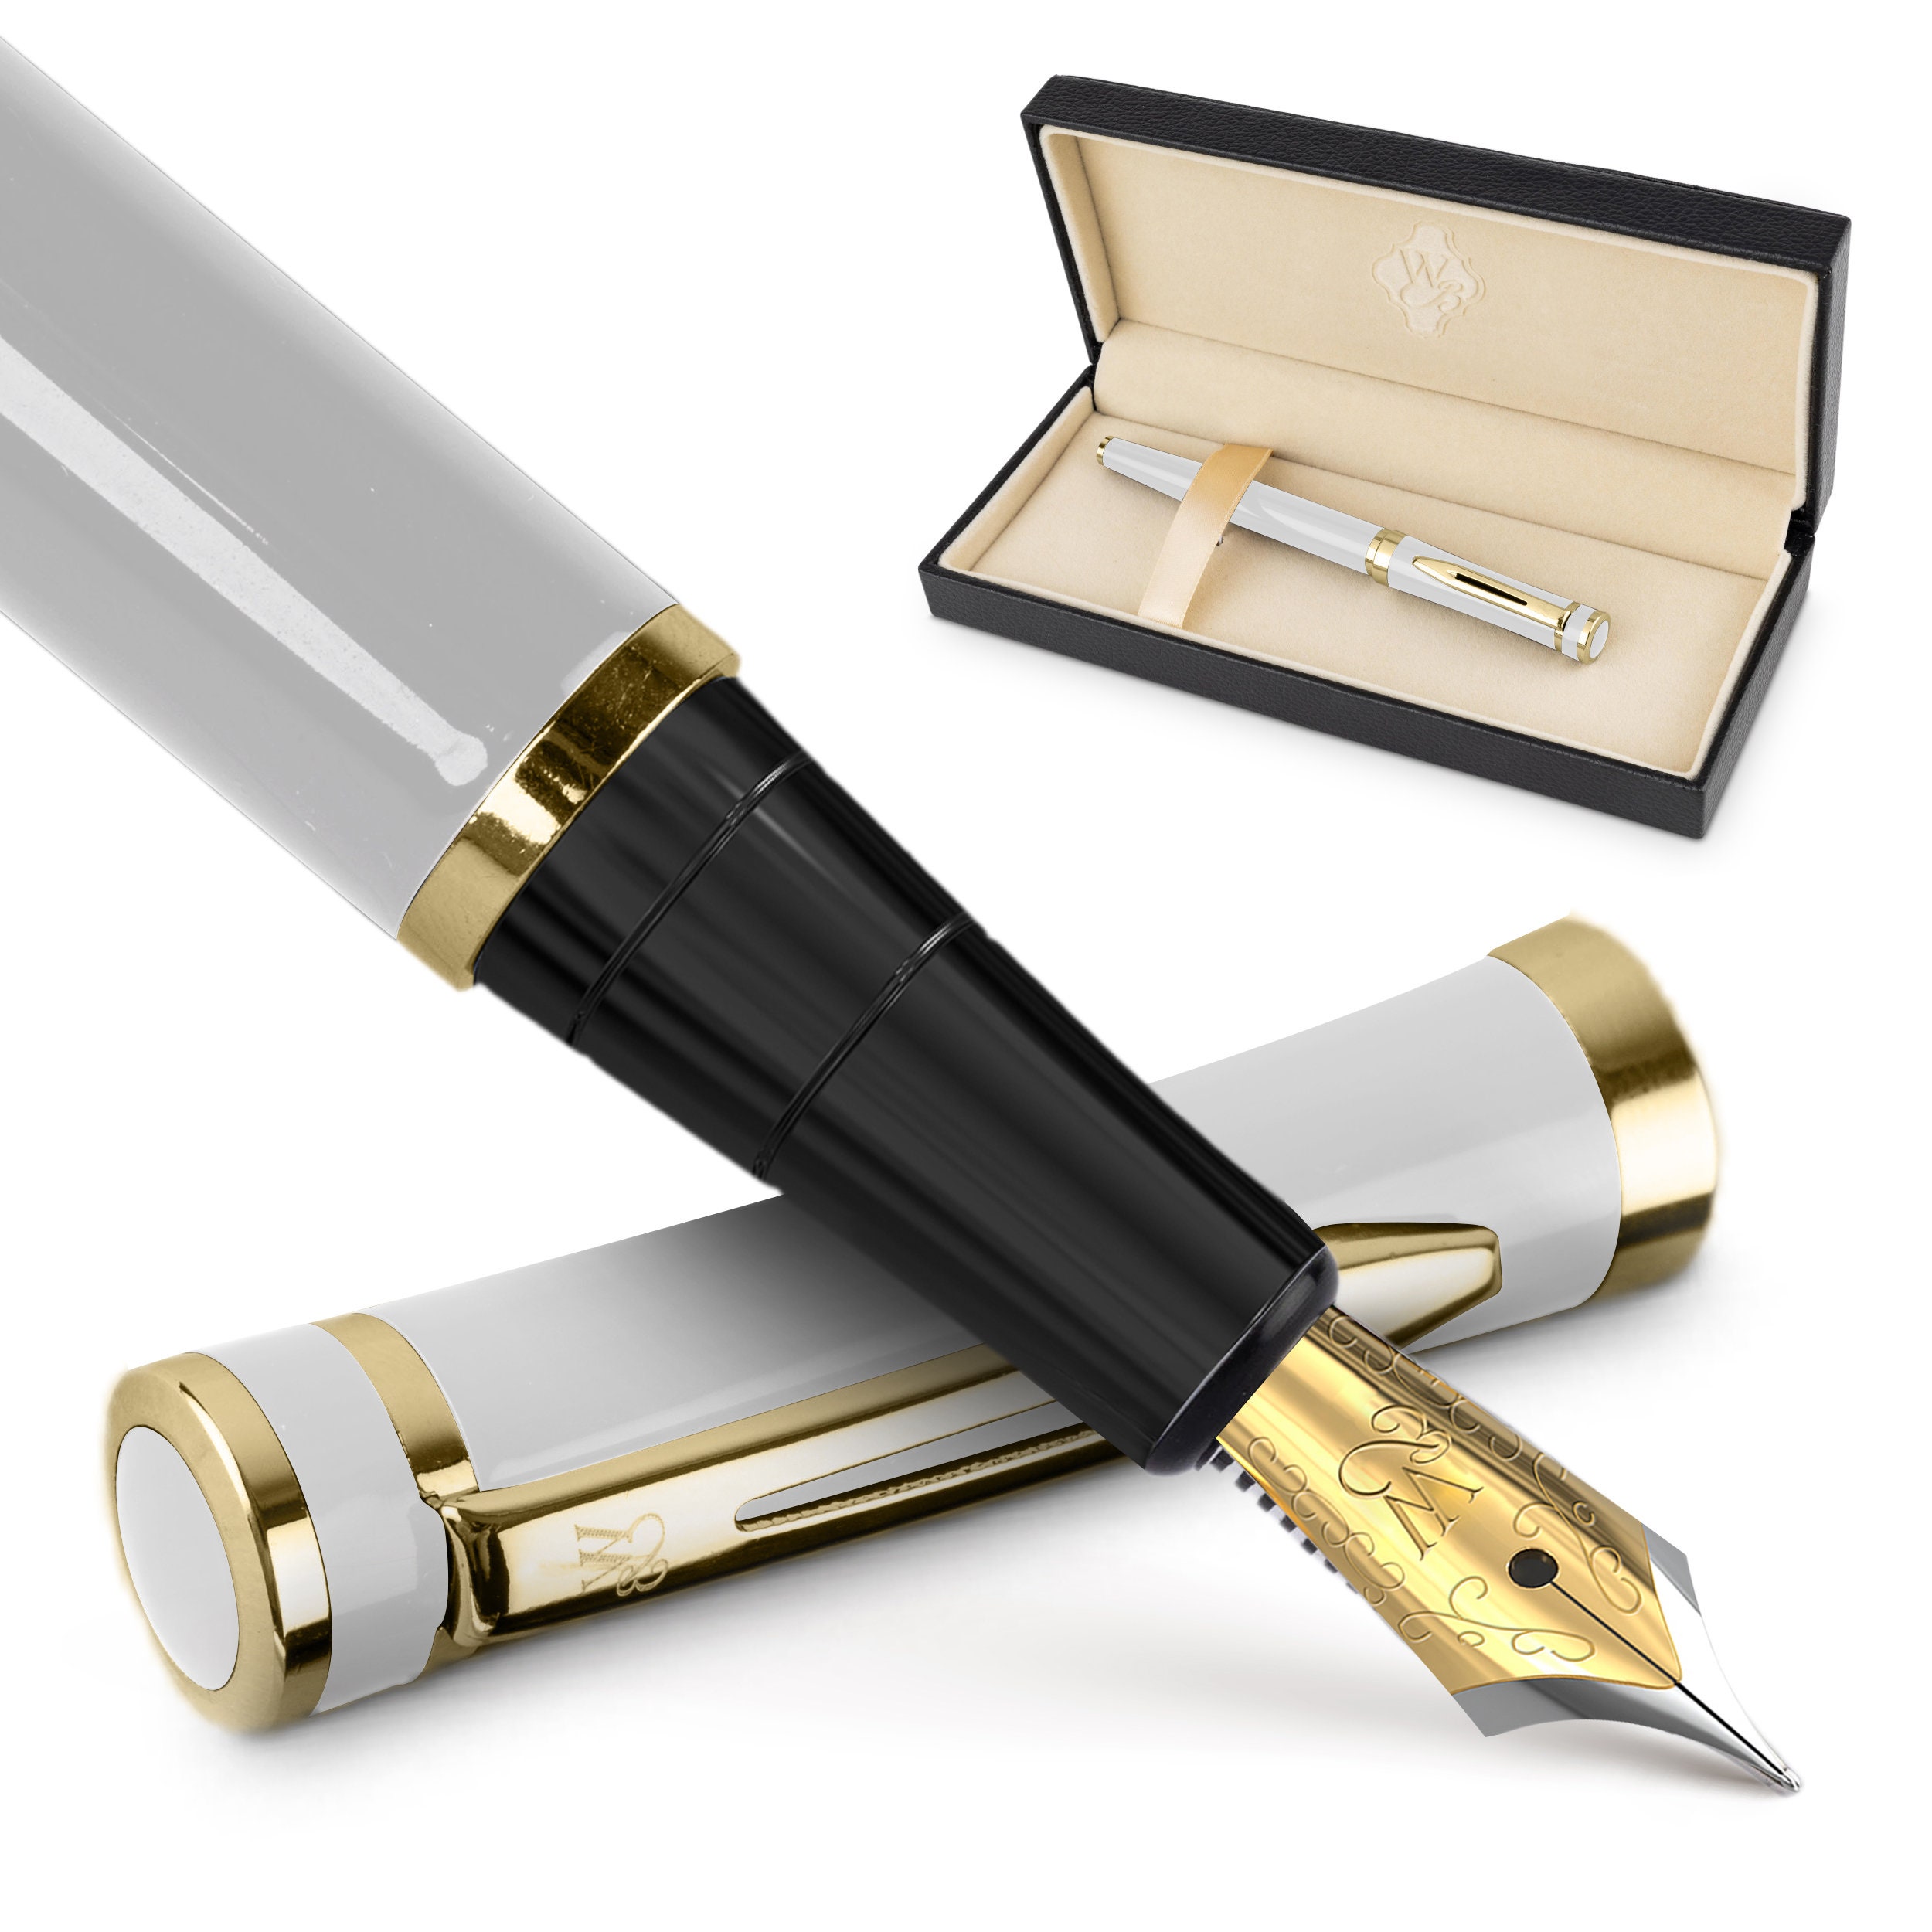 Premium Japanese Pens: What Is An Executive Pen And Which Should You  Choose?